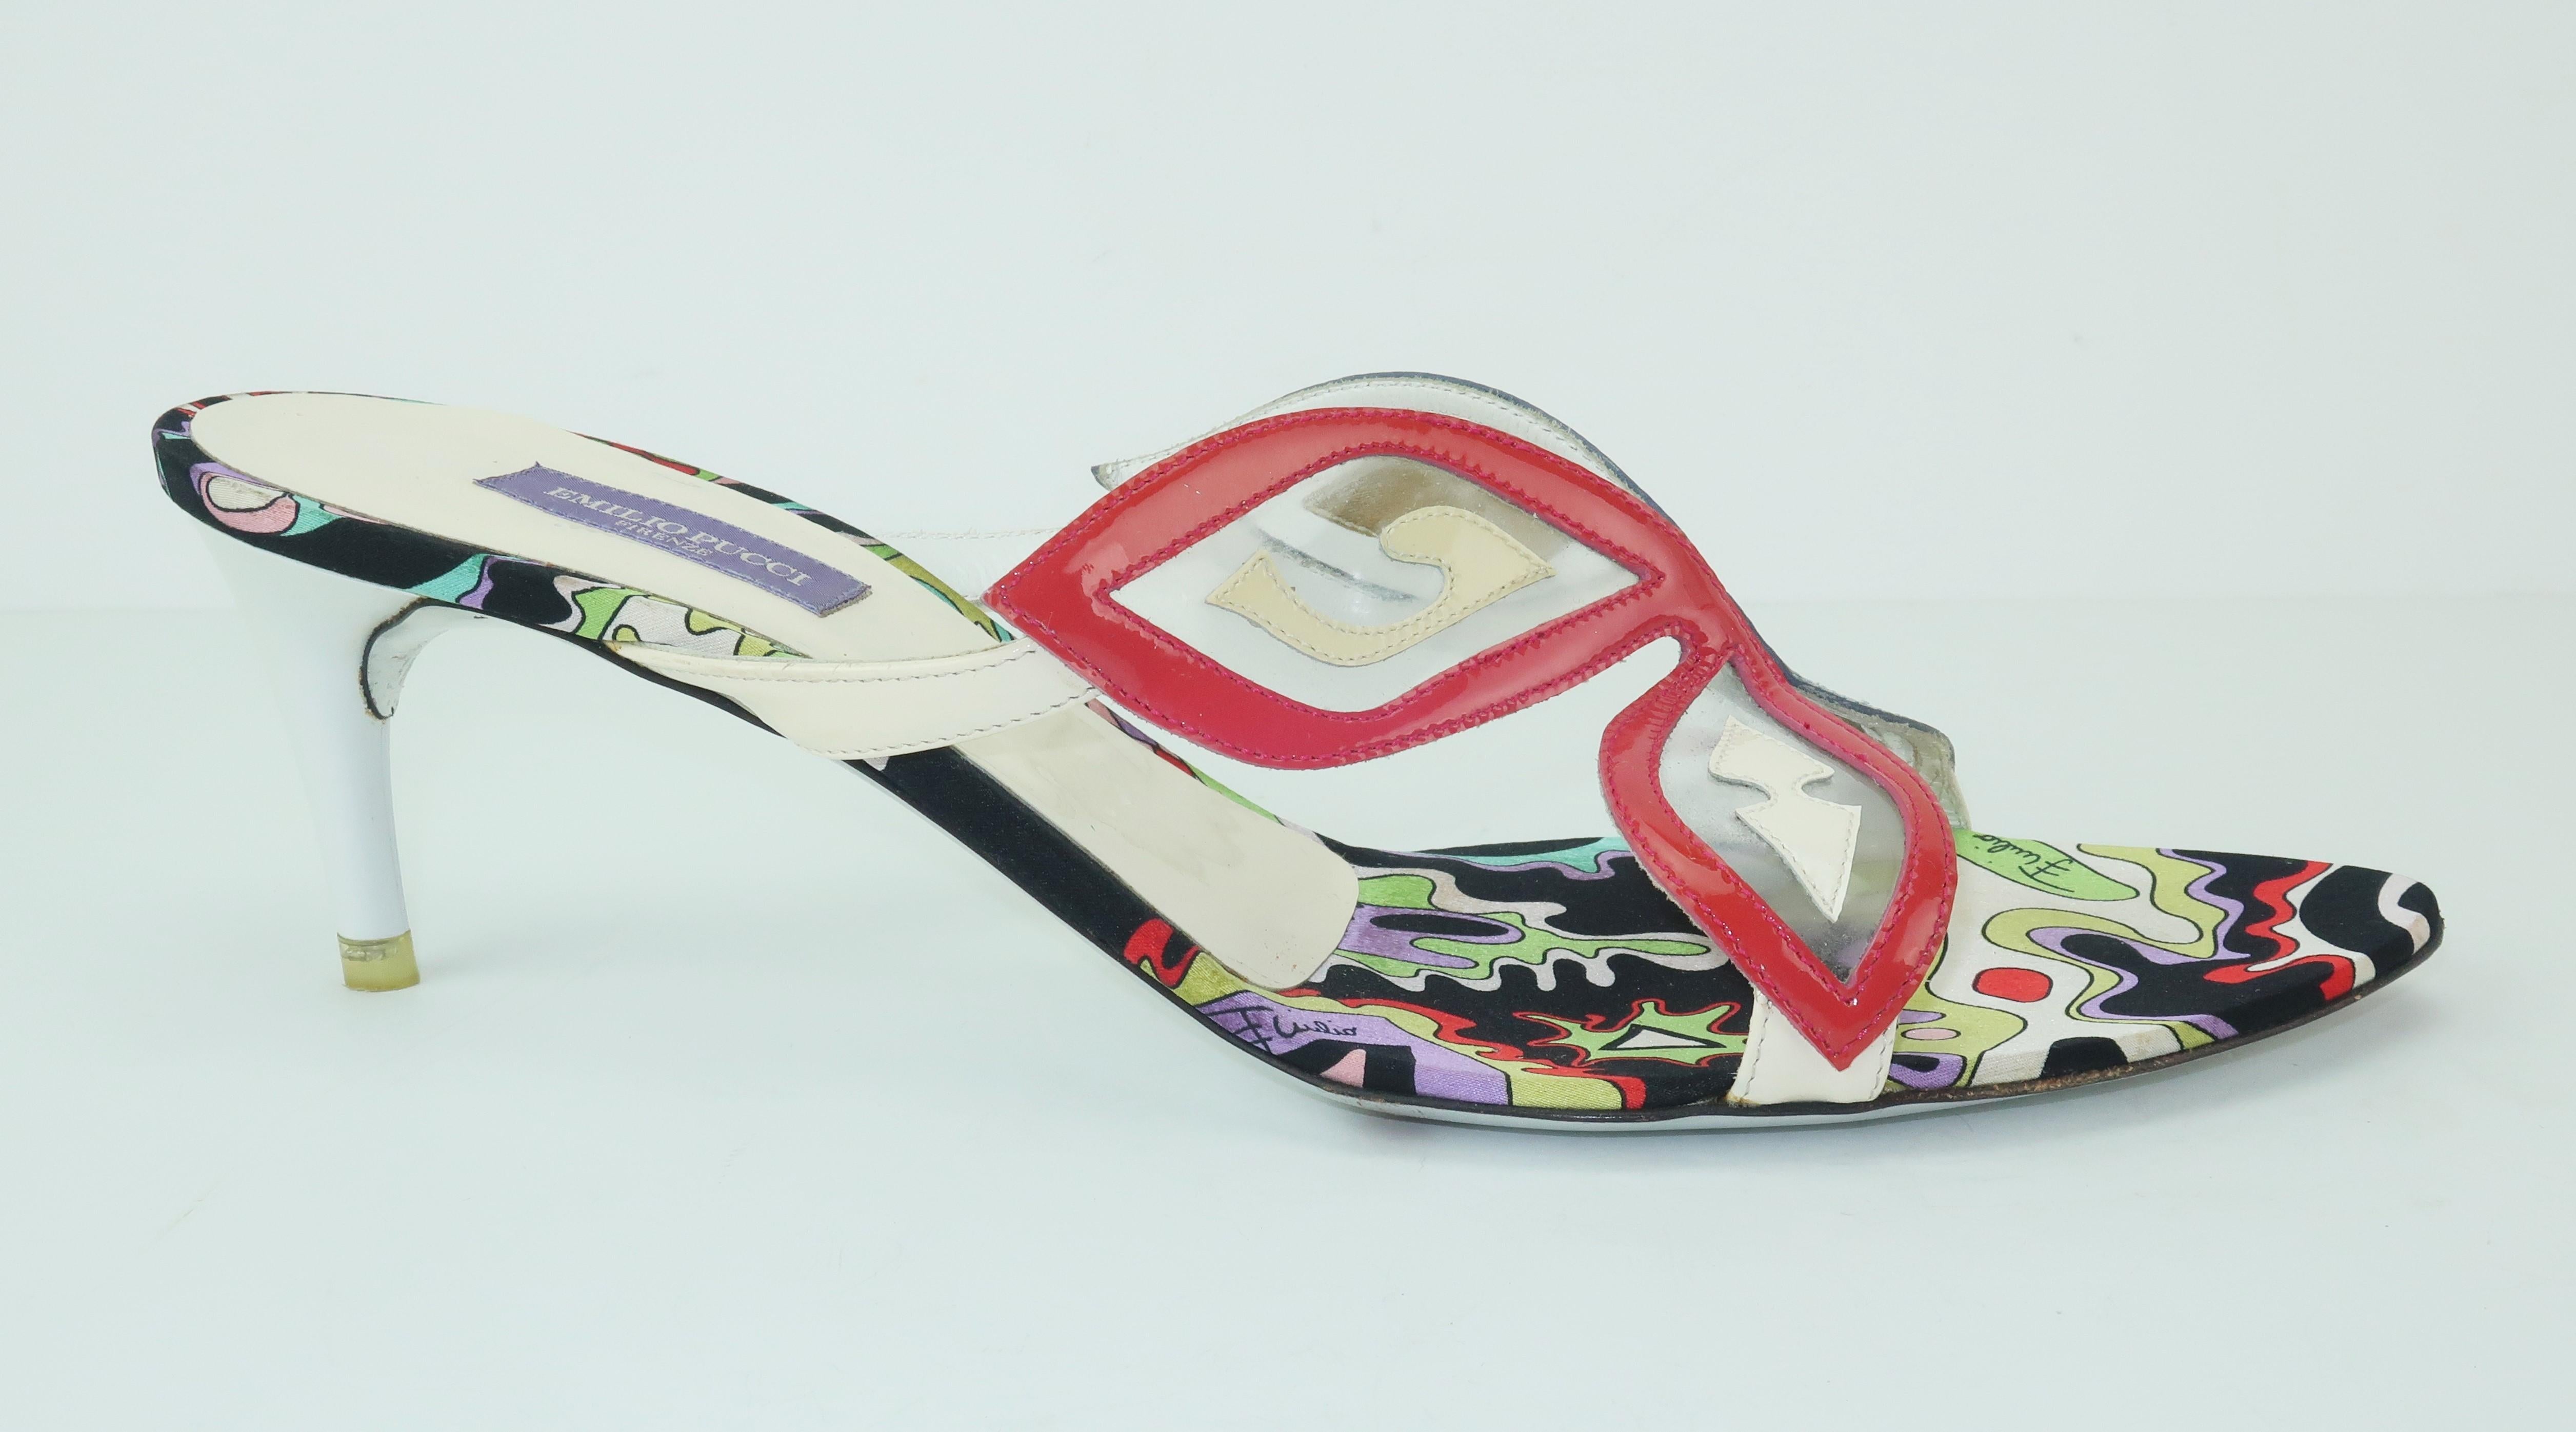 Brown Emilio Pucci Patent Leather Butterfly Mules Shoes Sz 39 1/2